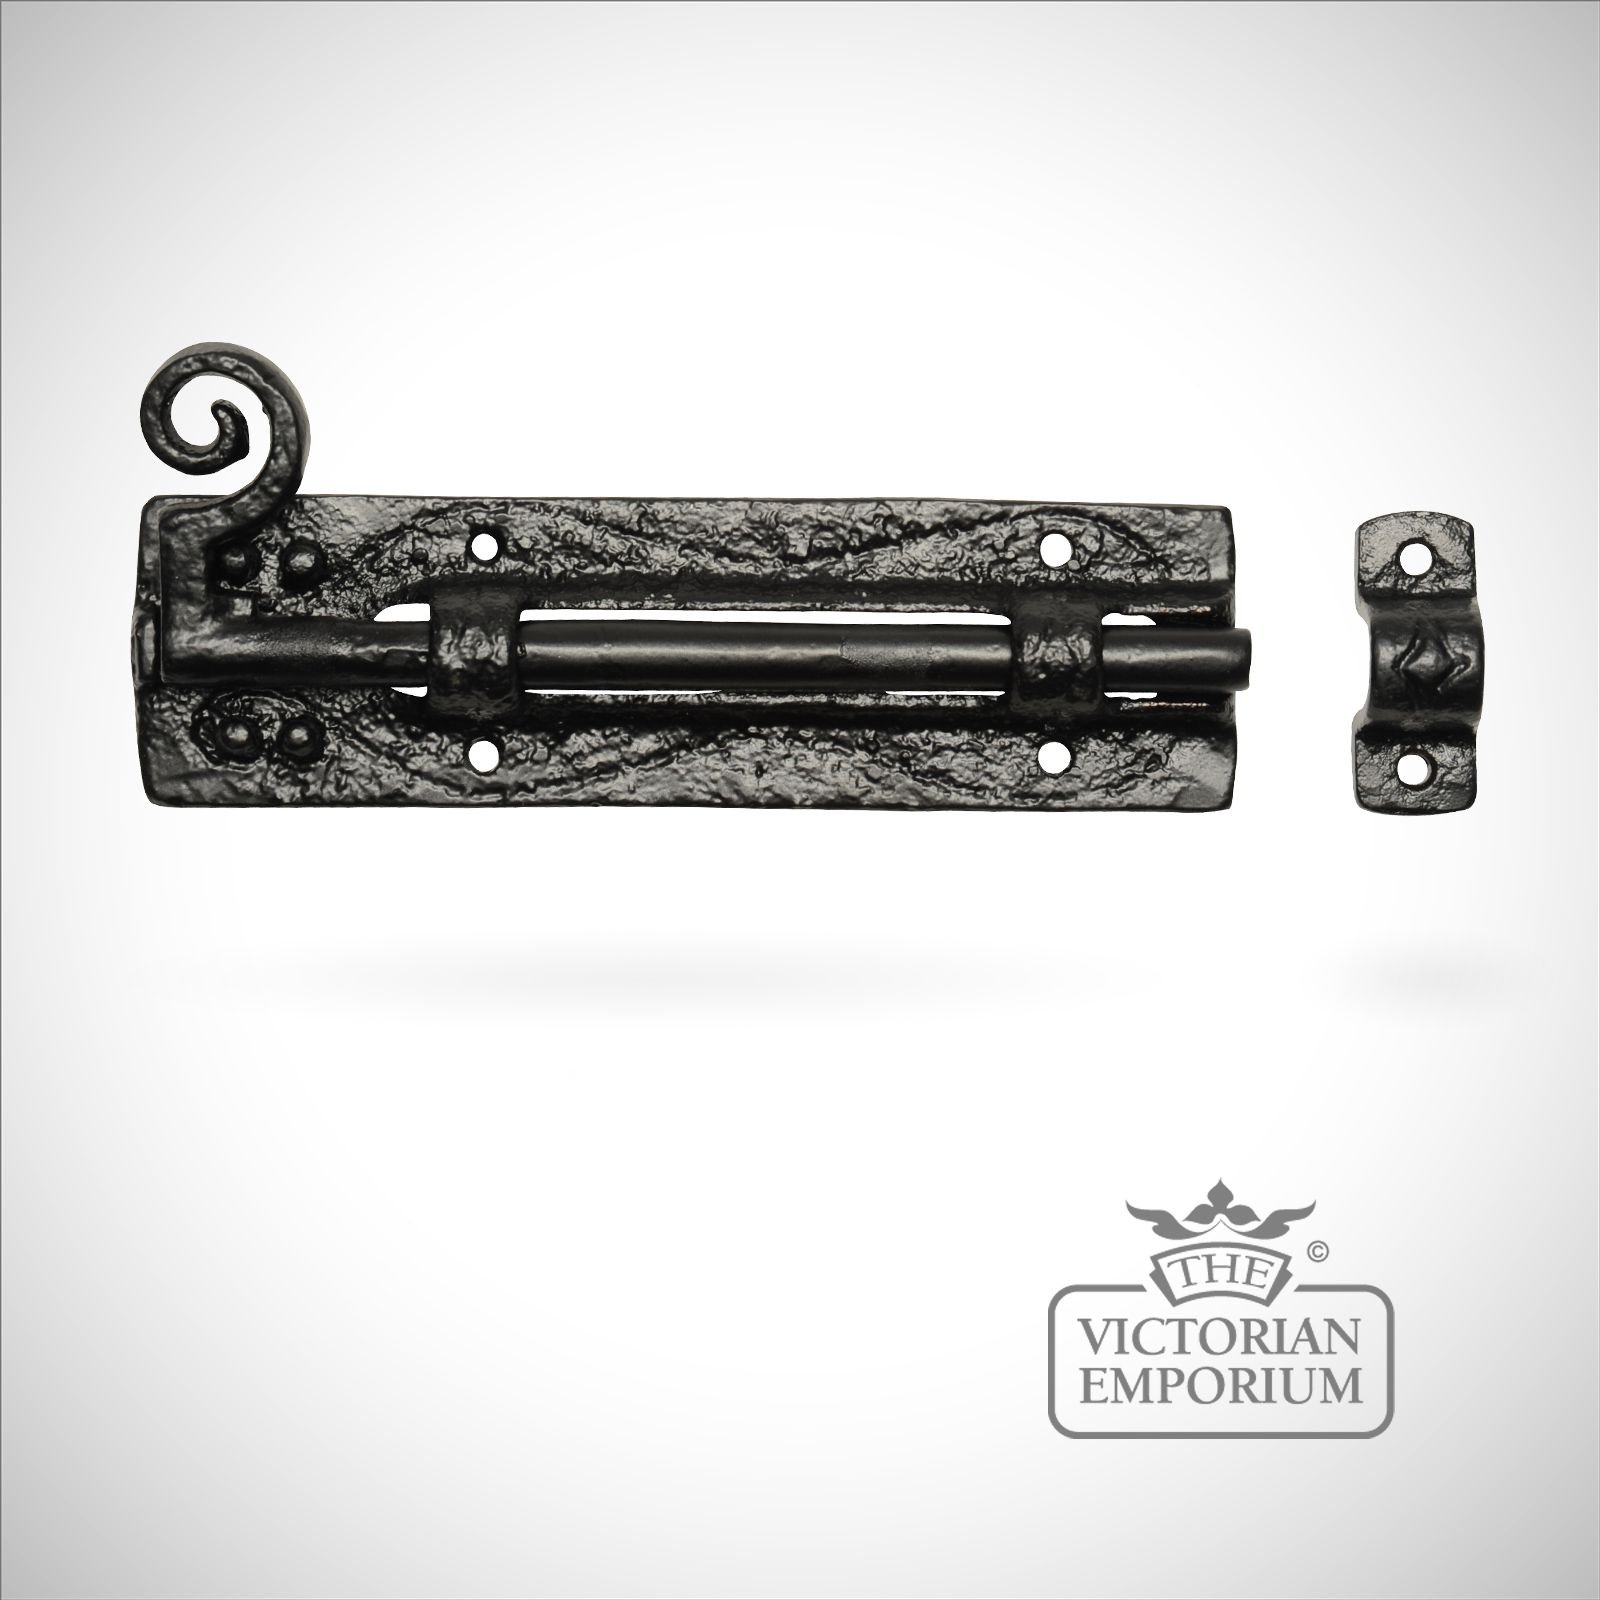 Black iron handcrafted plain door bolt with curly tail